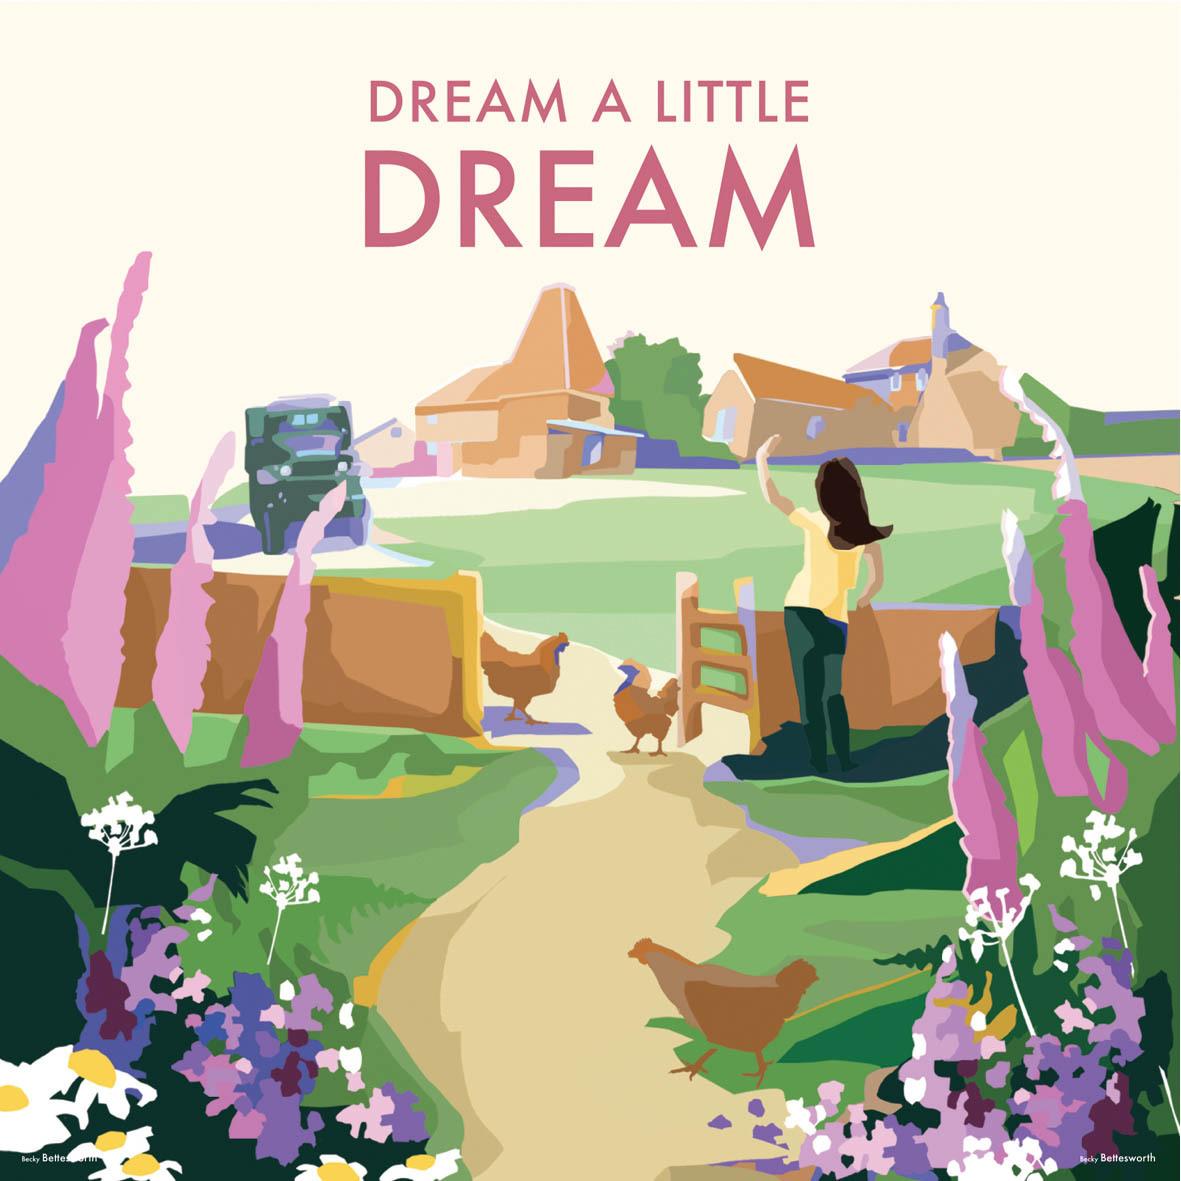 Dream a little dream - Eco friendly, recycled greetings card